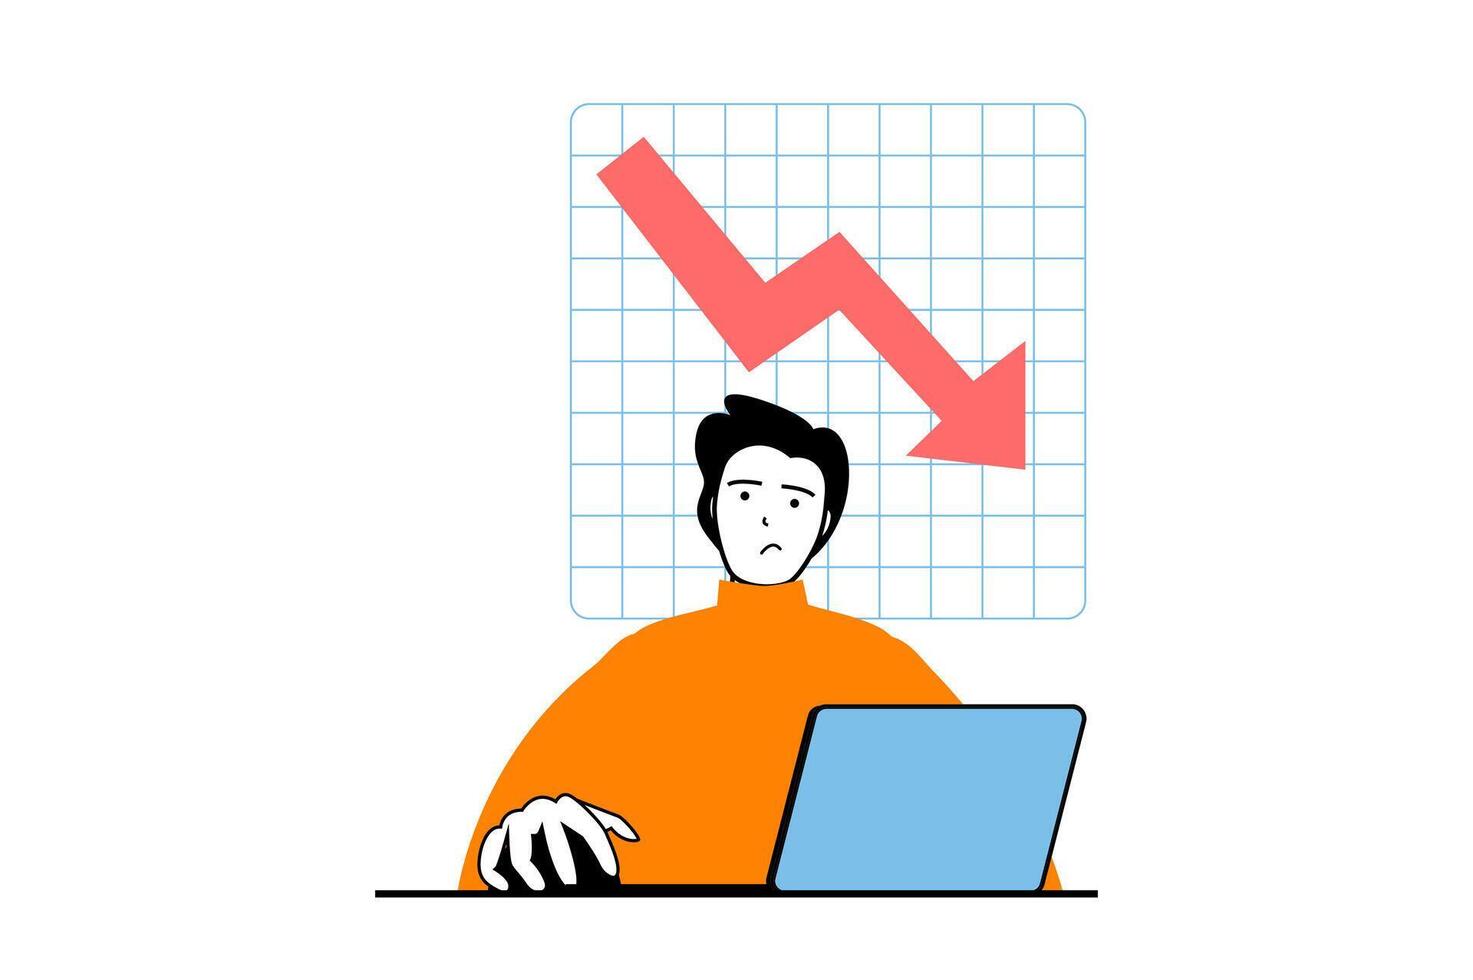 Crisis management concept with people scene in flat web design. Man making risk investment and losing money at financial data graphs. Vector illustration for social media banner, marketing material.